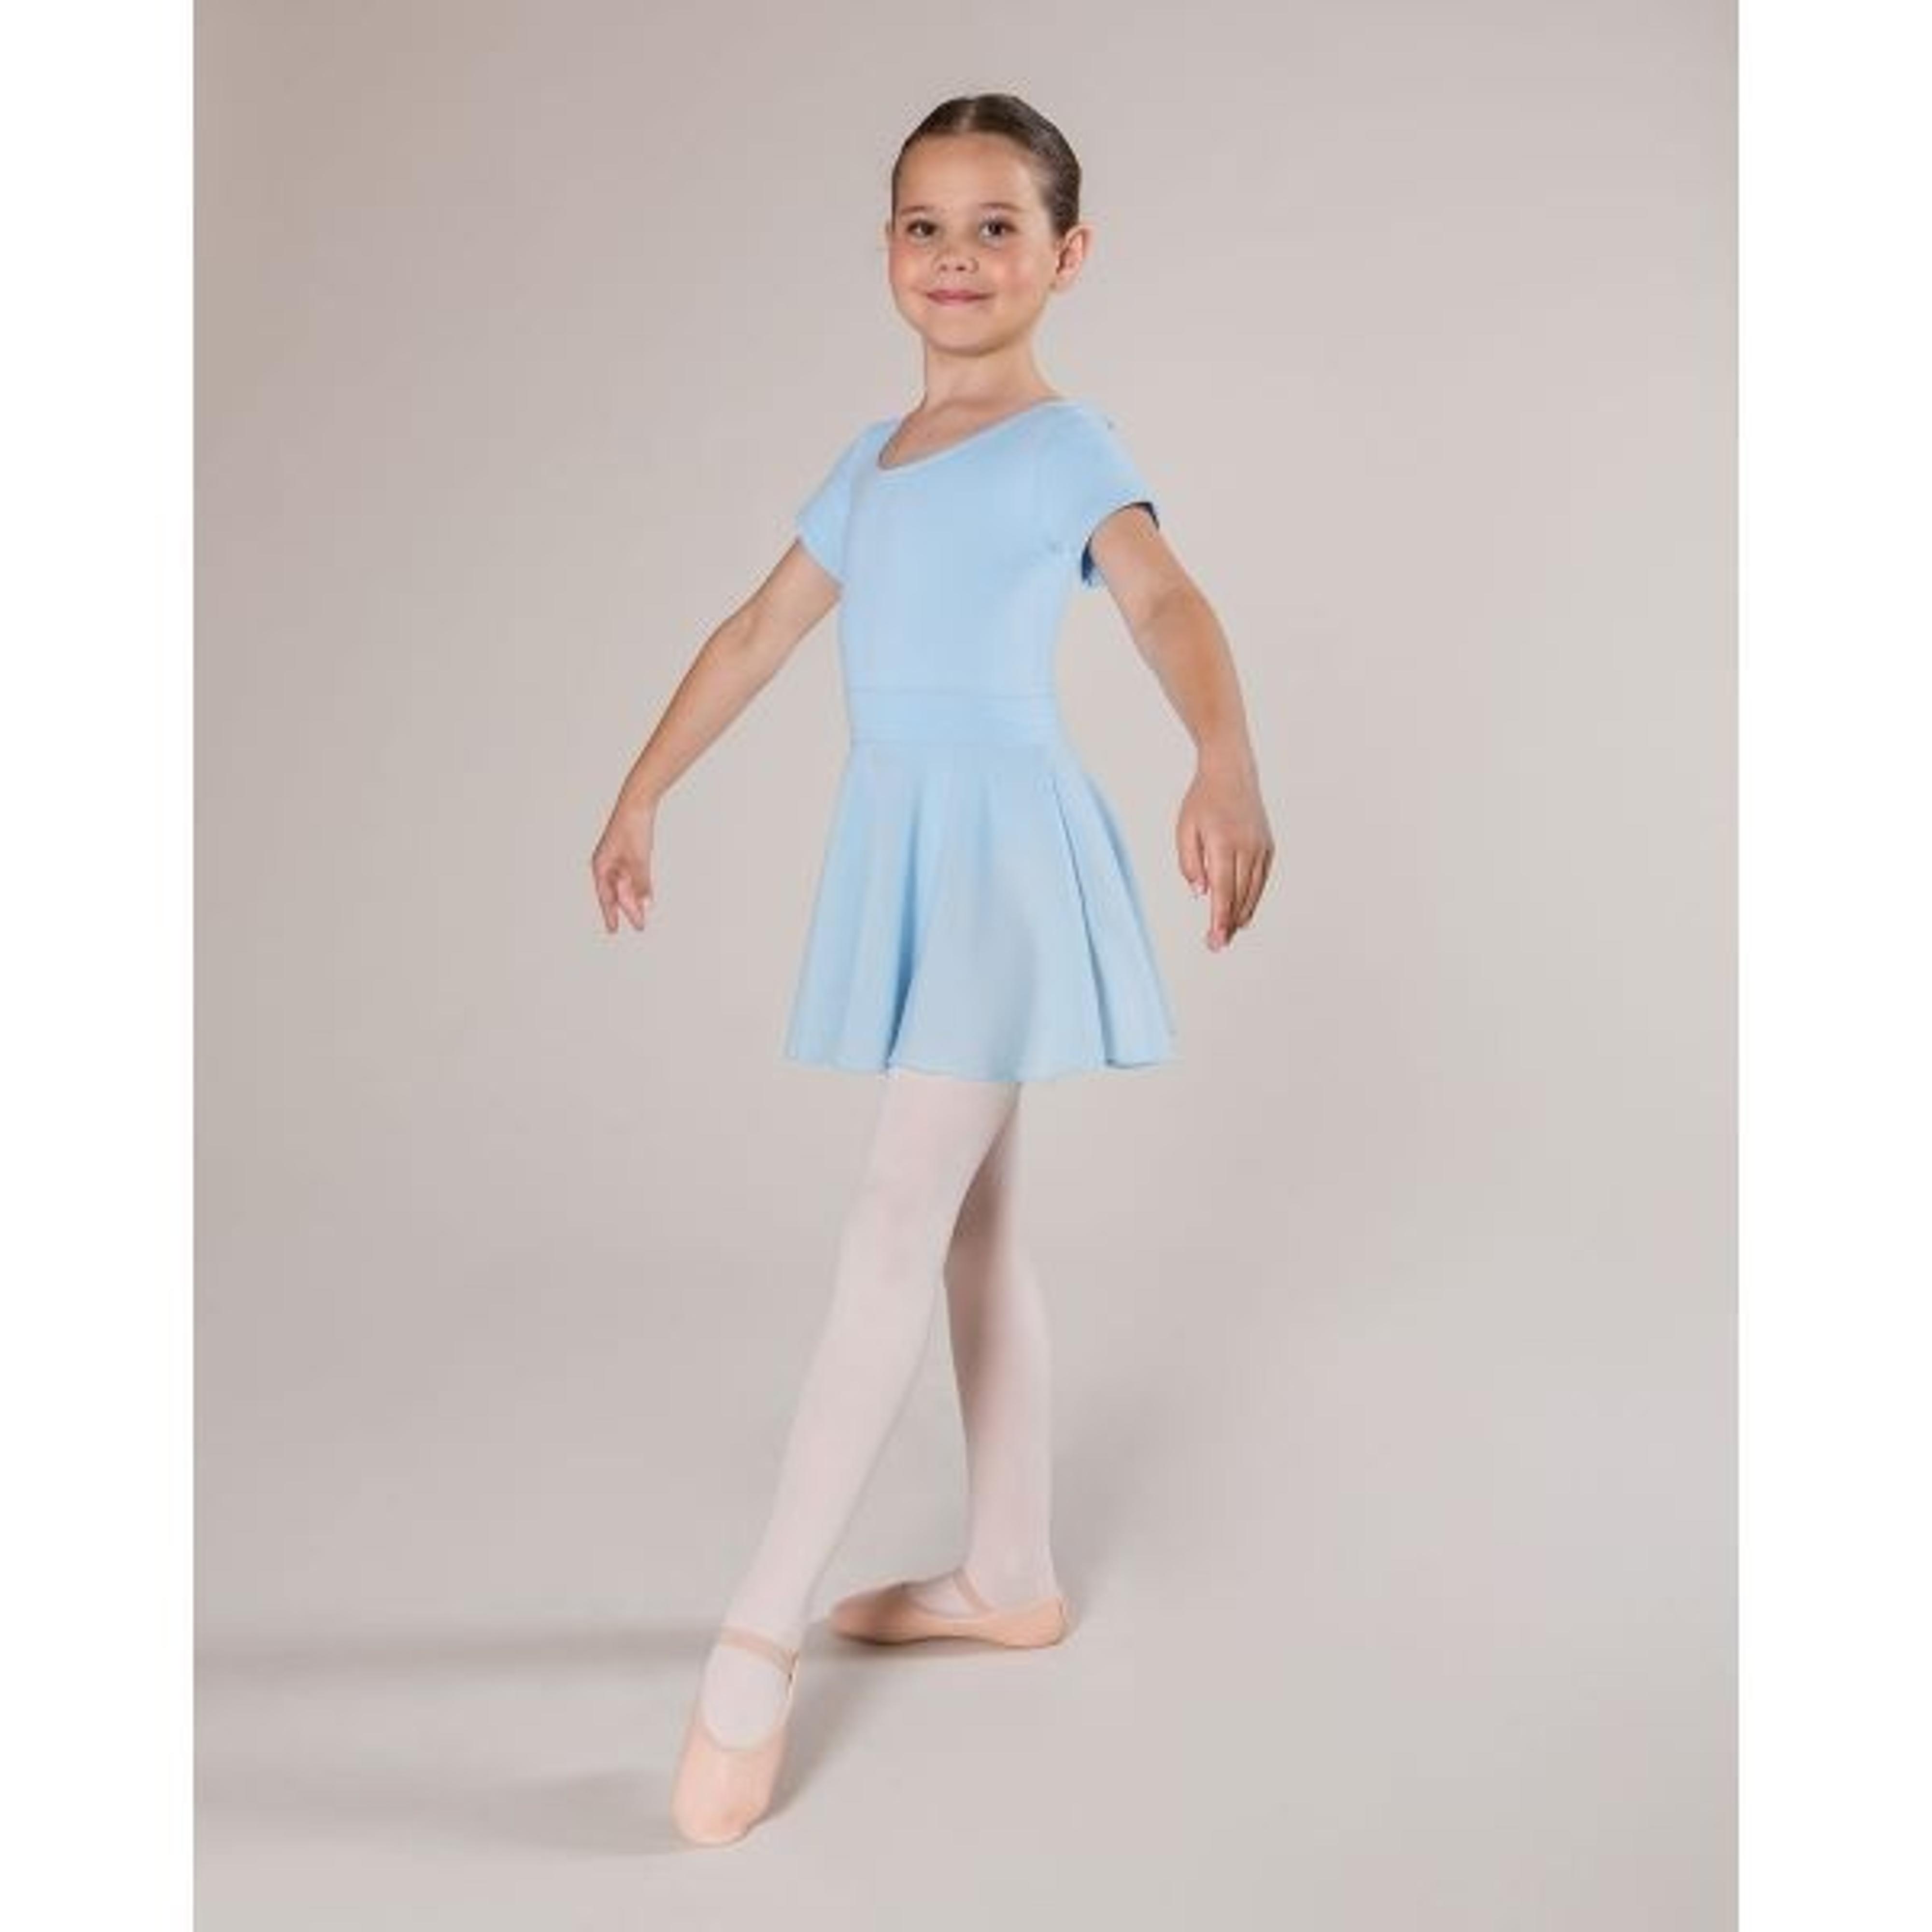 made of soft and durable cotton blend tanzmuster girls´ long-sleeved ballet leotard Anna with chiffon skirt and rhinestones beautiful dance dress for children in many colors